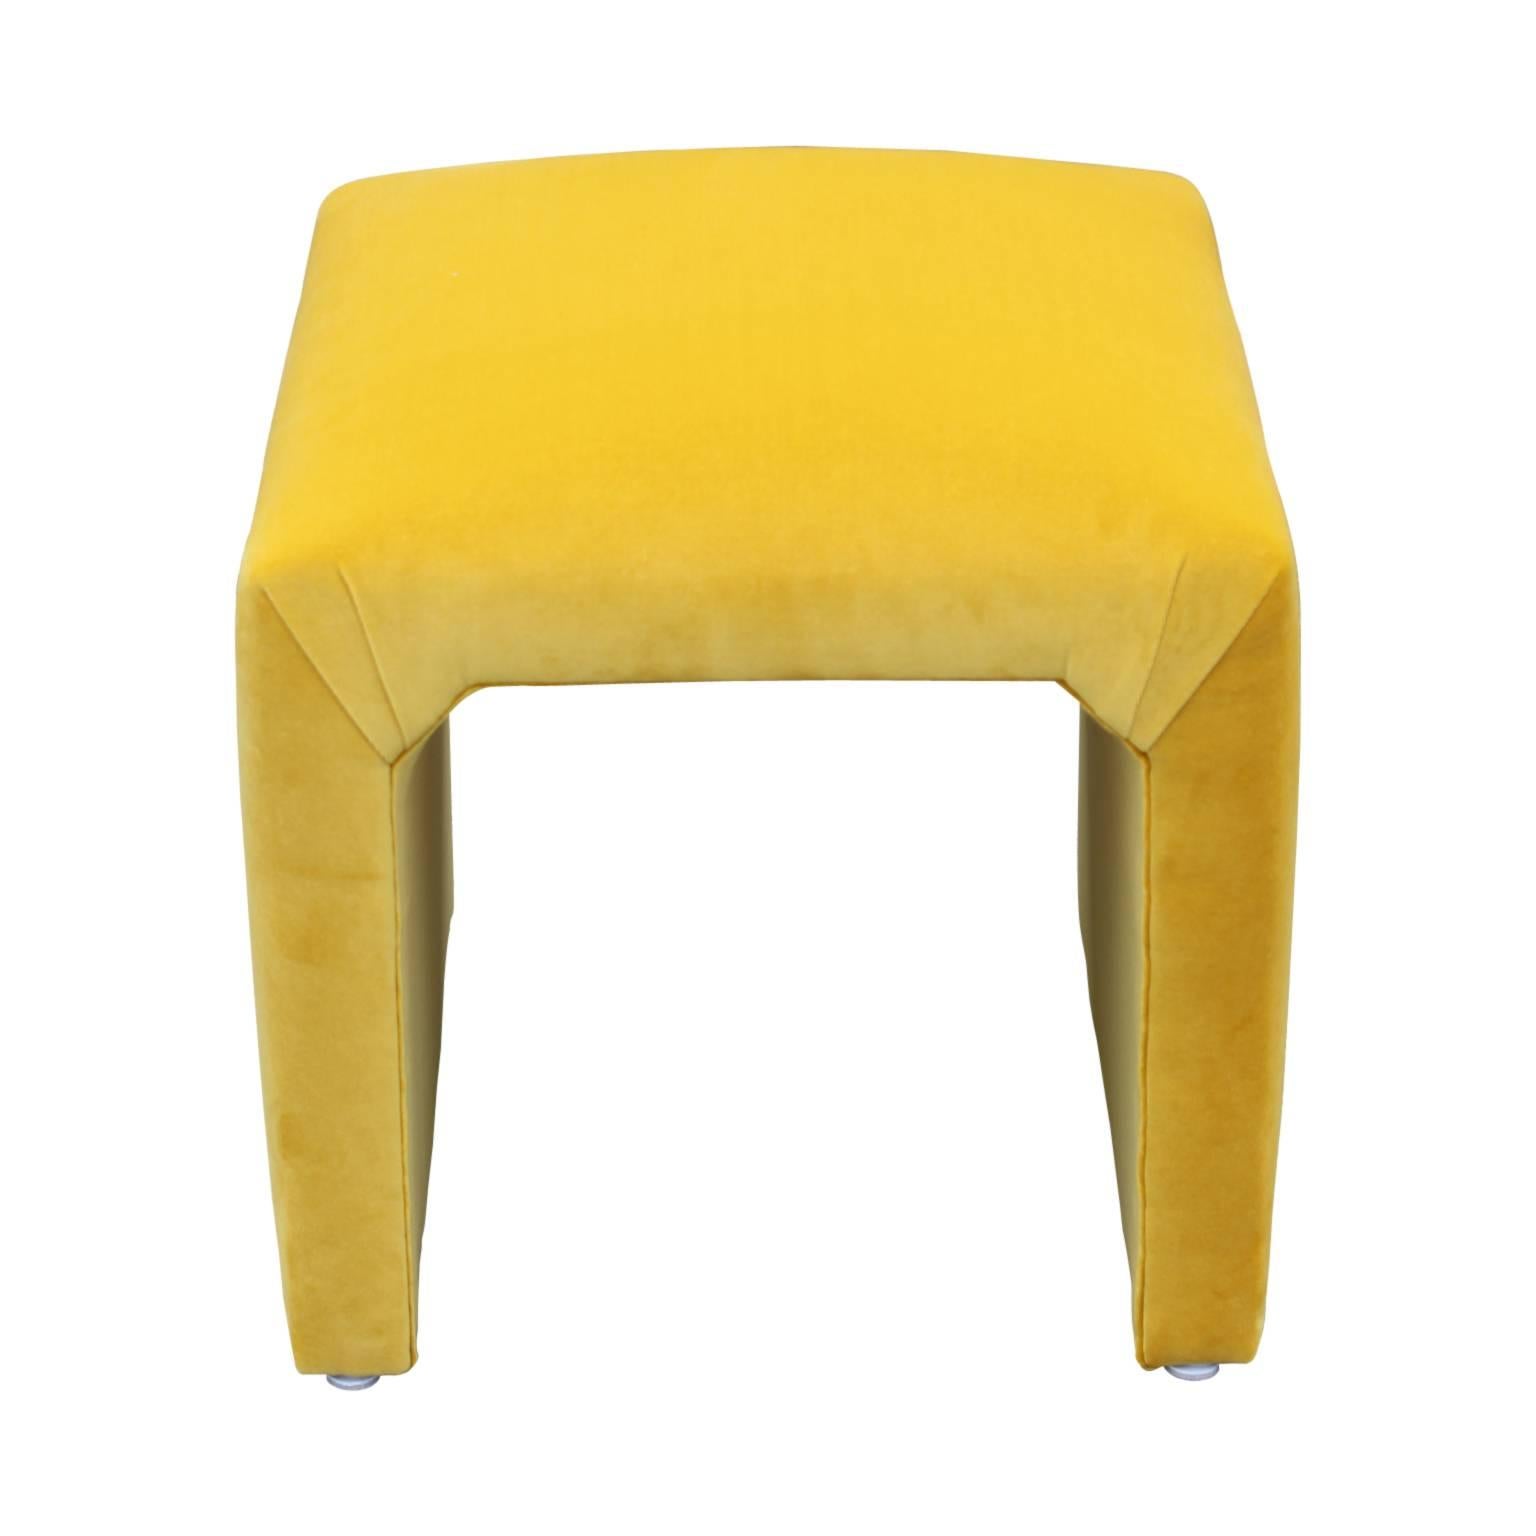 Pair of Milo Baughman for Thayer Coggin footstools recently re-uphosltered in yellow velvet. Stunning set to add a touch of color to any modern or mid-mod home!